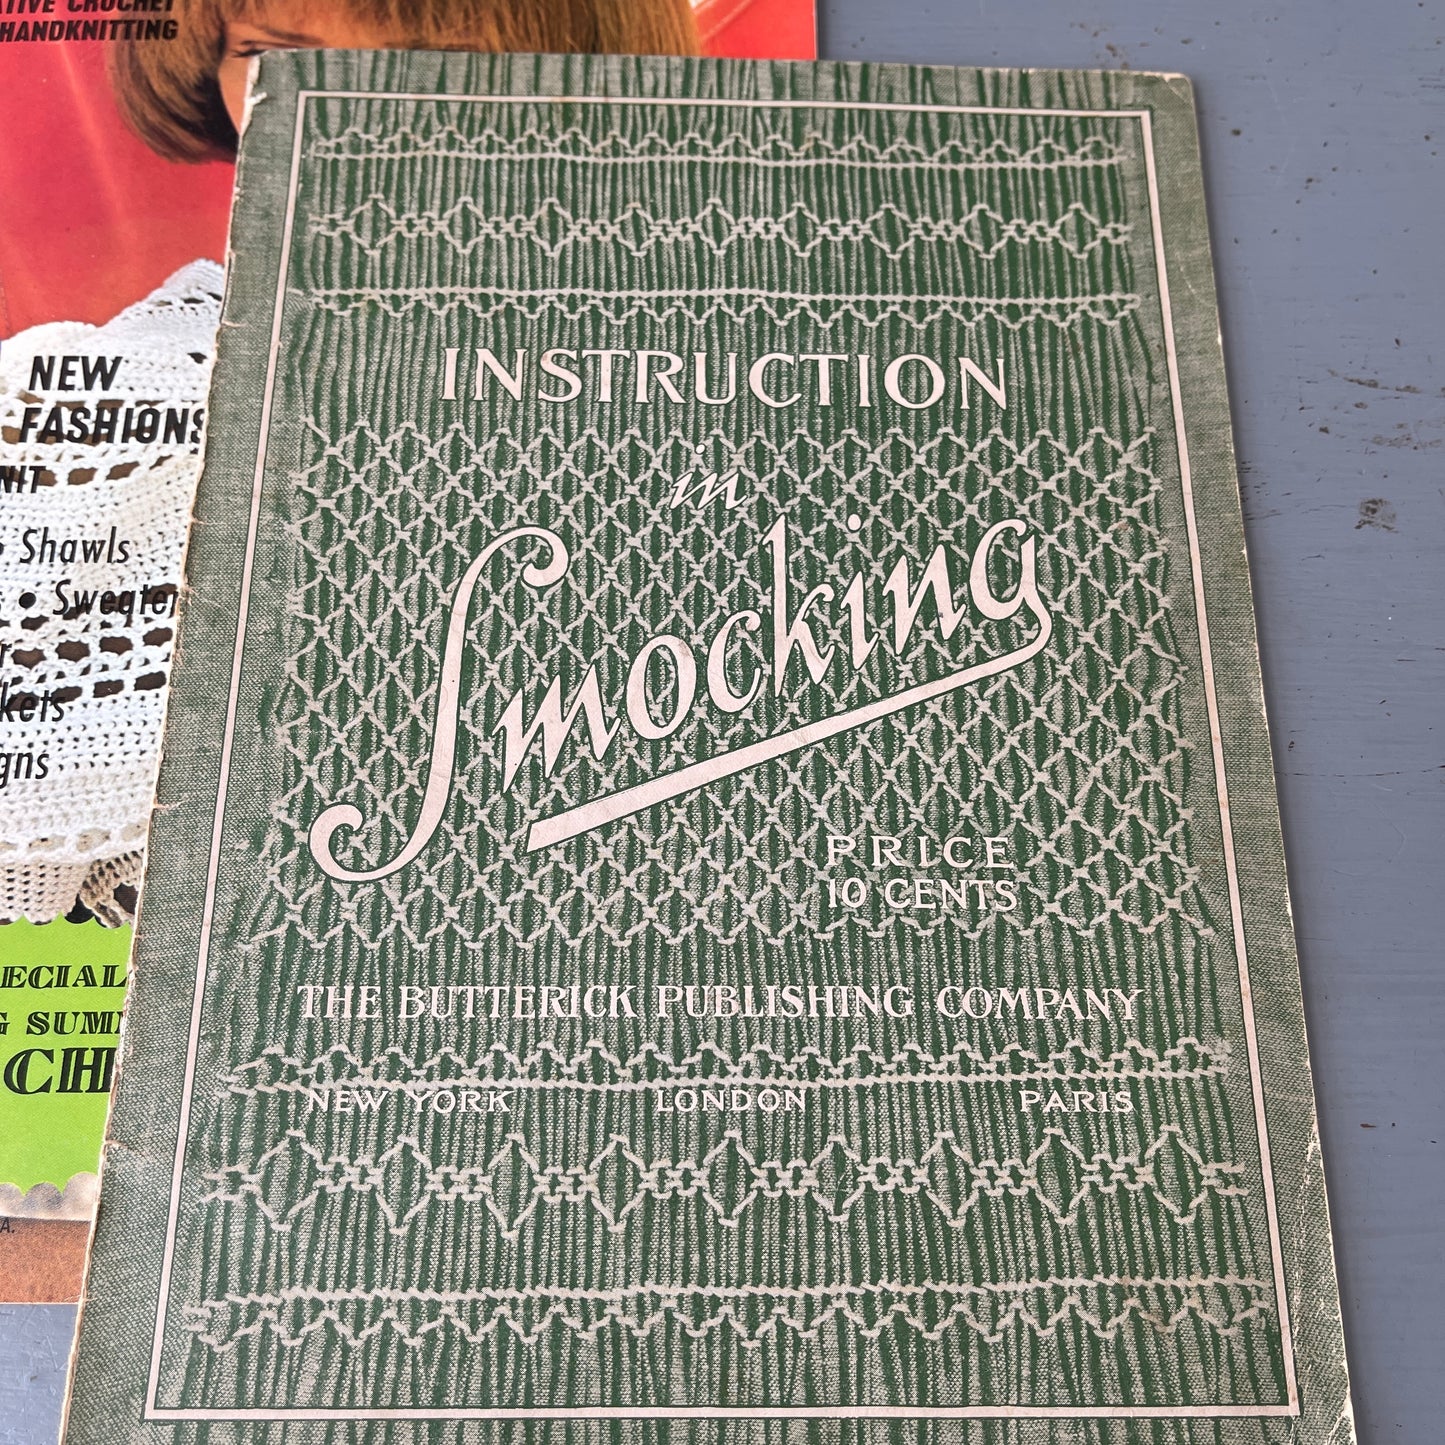 Crochet and Knitting choice vintage booklets see pictures and variations*